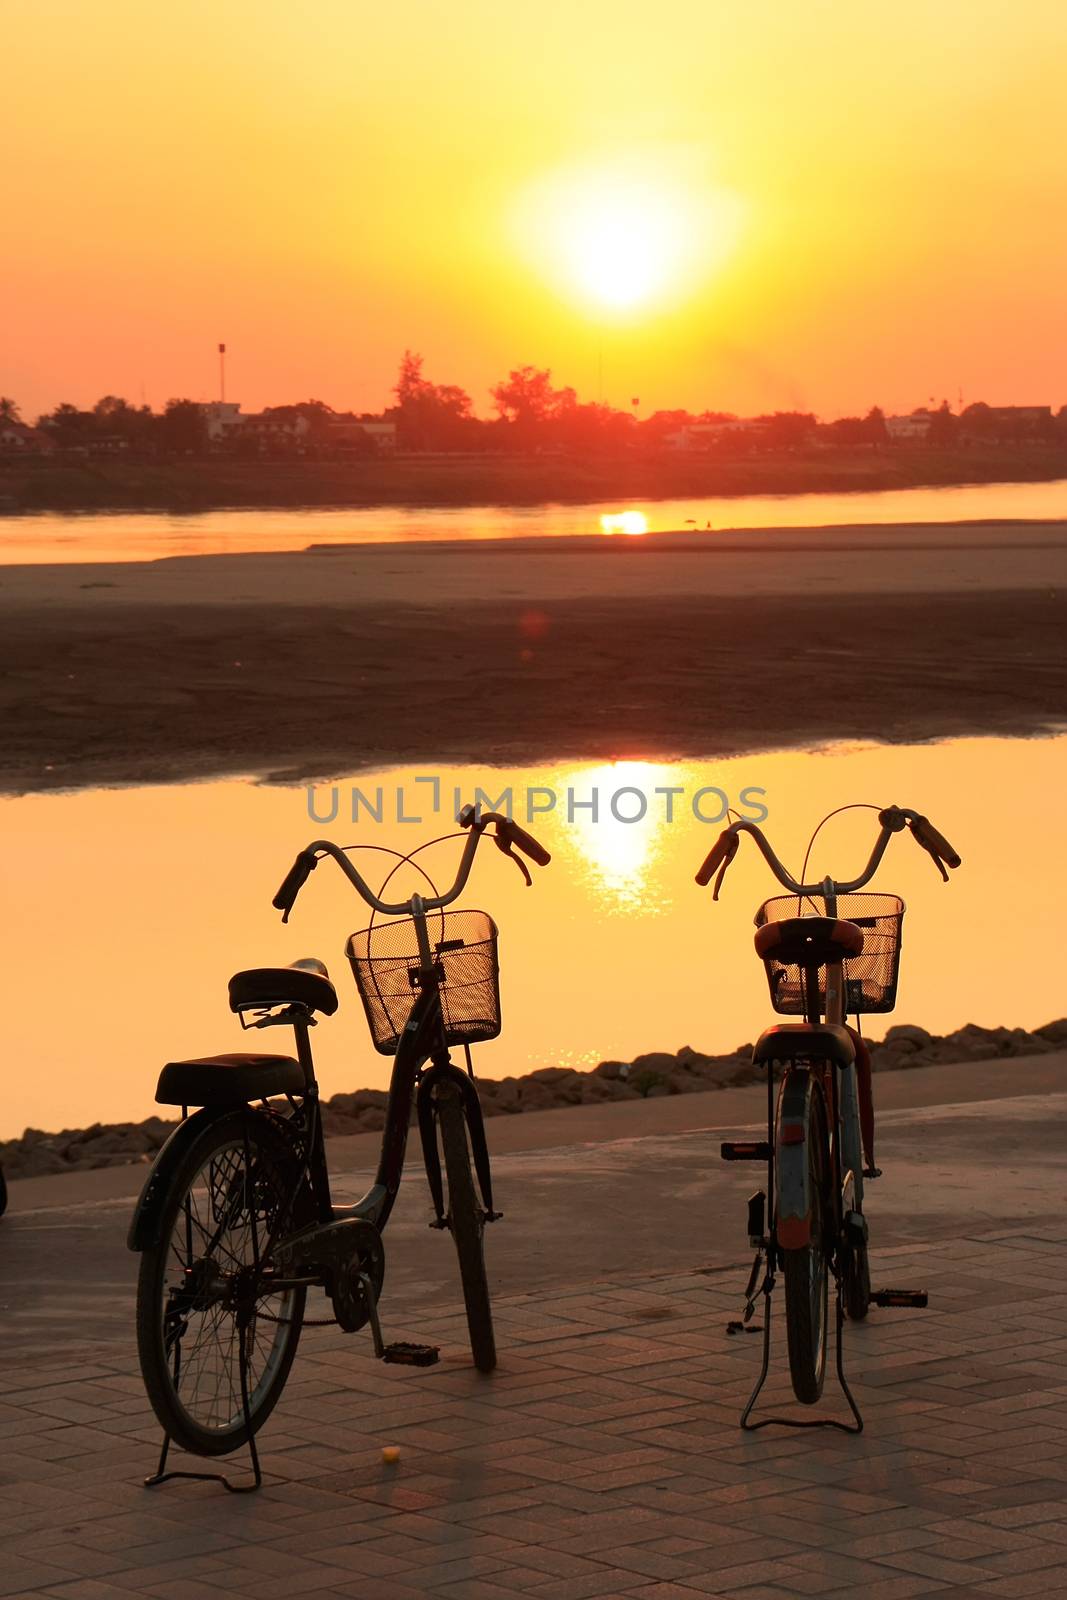 Silhouetted bicycles near Mekong river at sunset, Vientiane, Laos, Southeast Asia